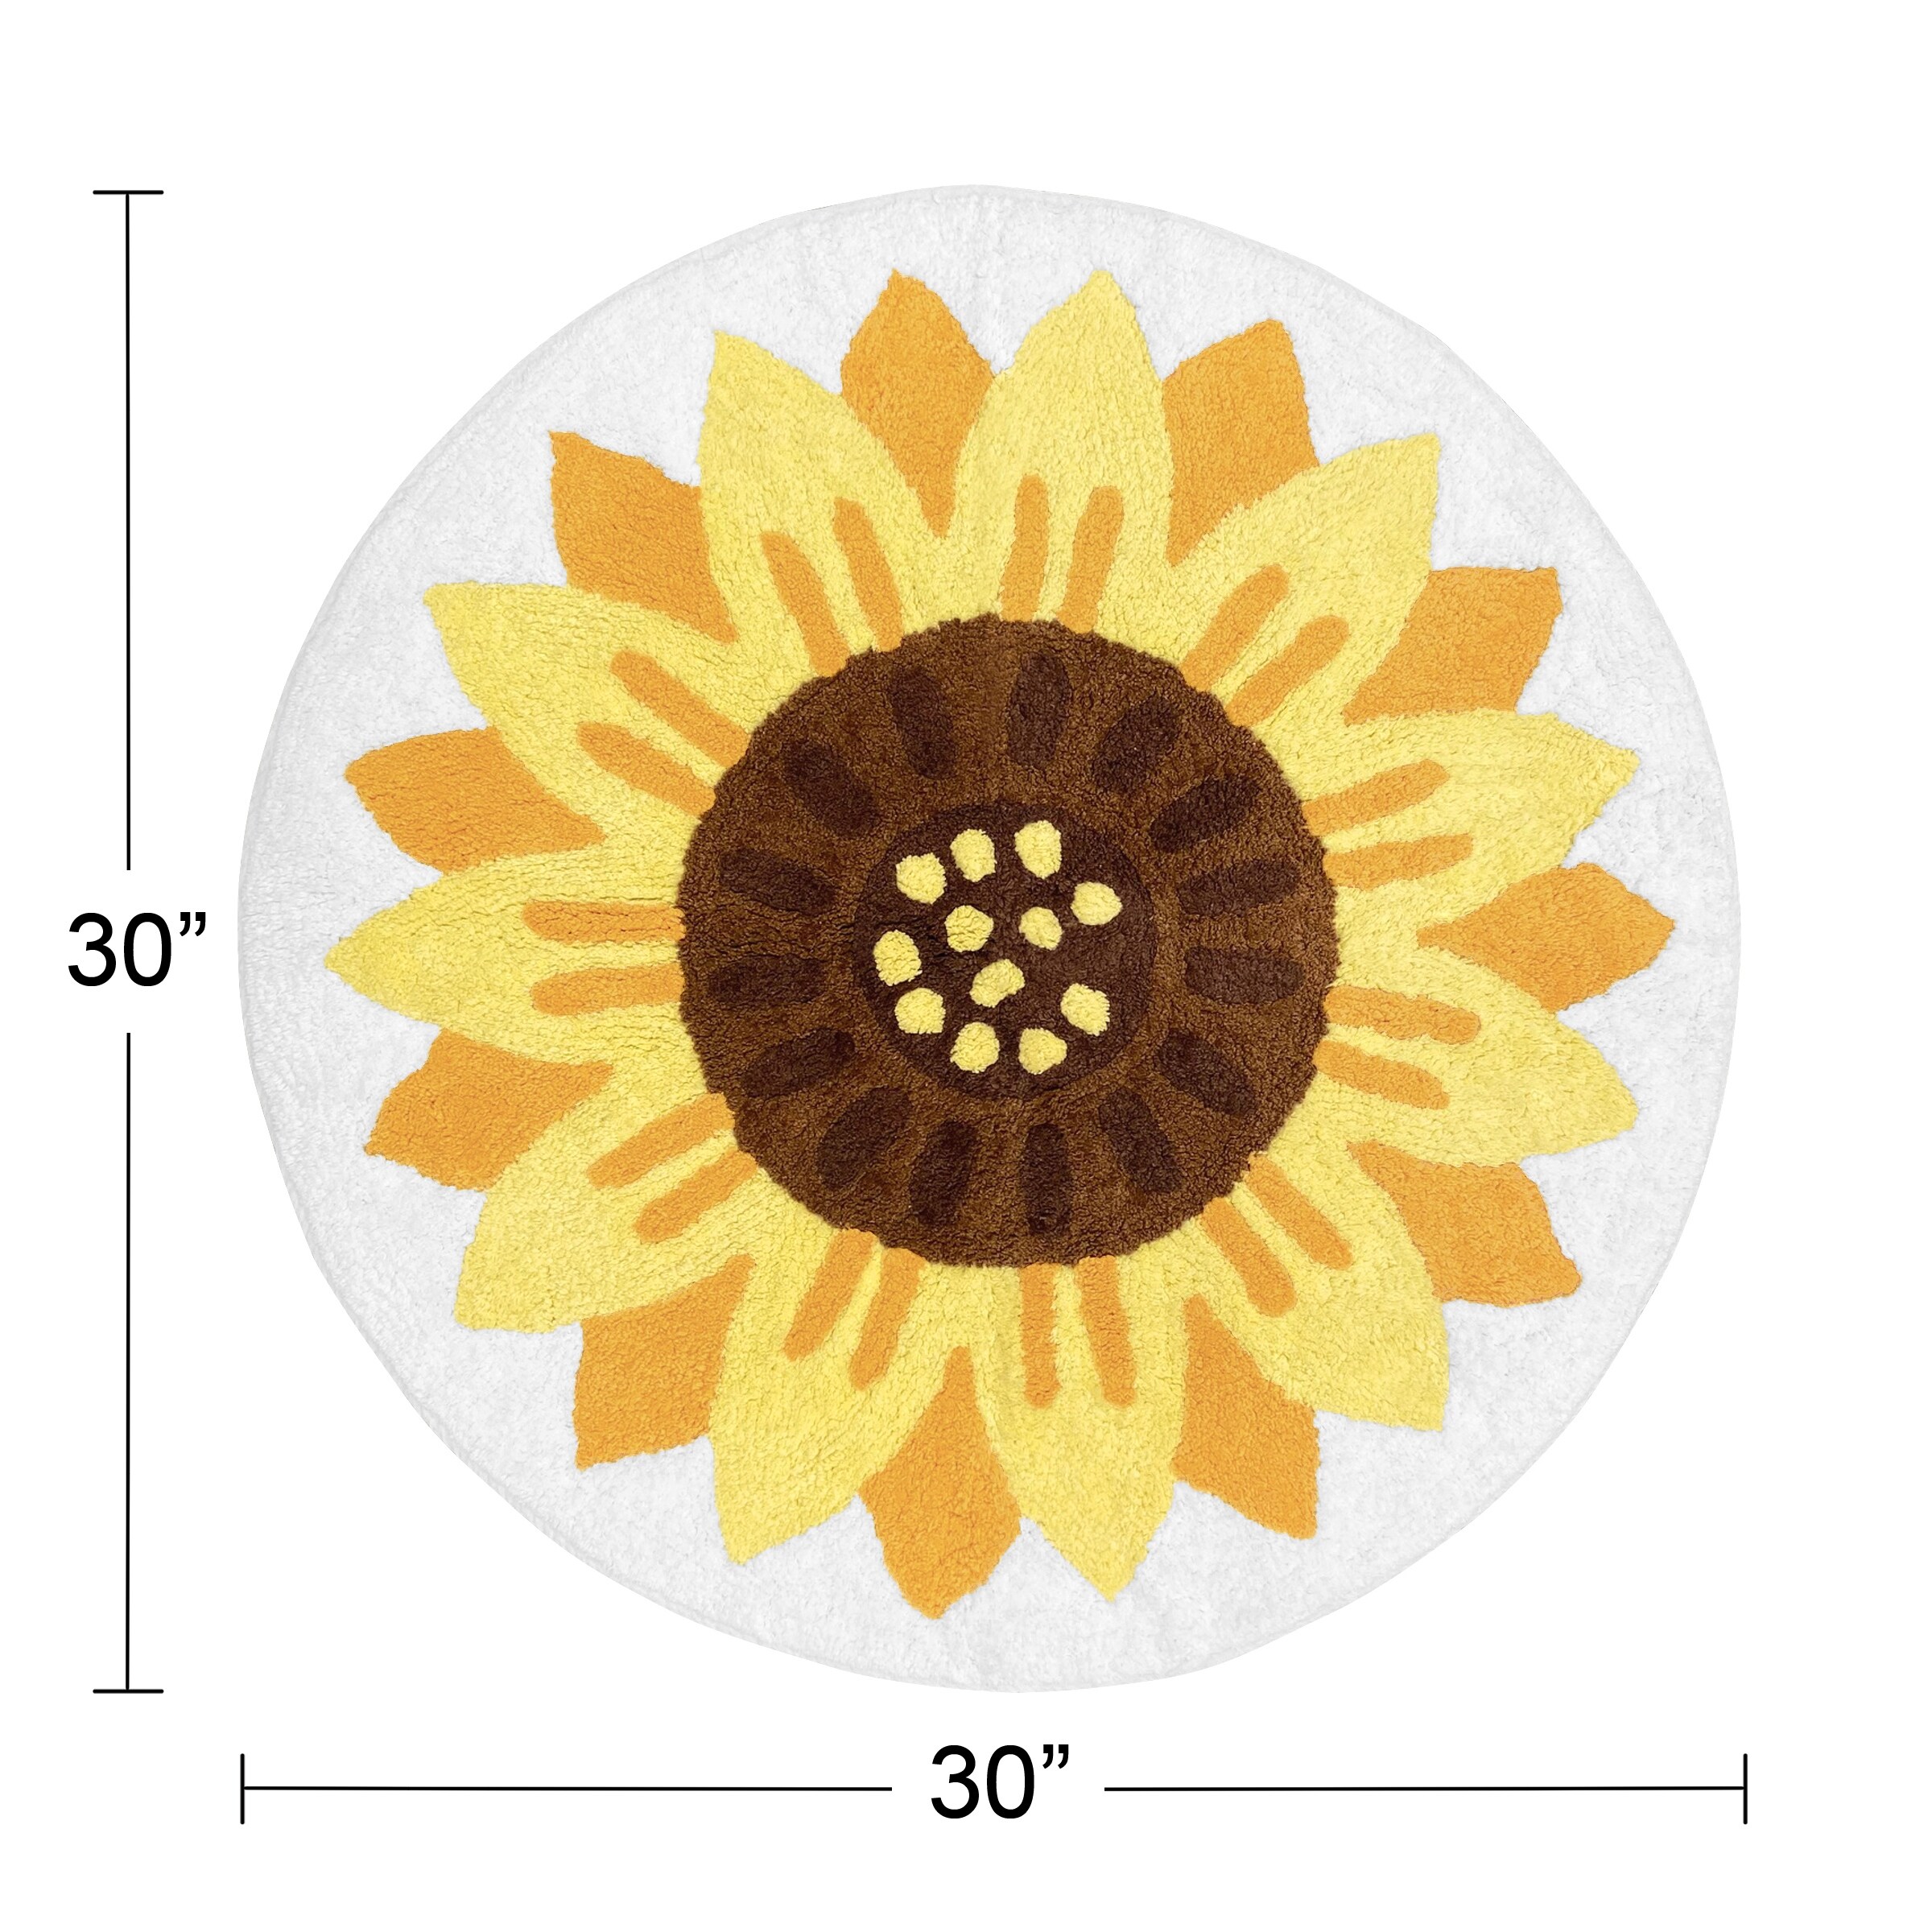 Sunflower Floral Collection Accent Floor Rug (30in Round) - Yellow, Green and White Boho Farmhouse Flower - 2' x 3'